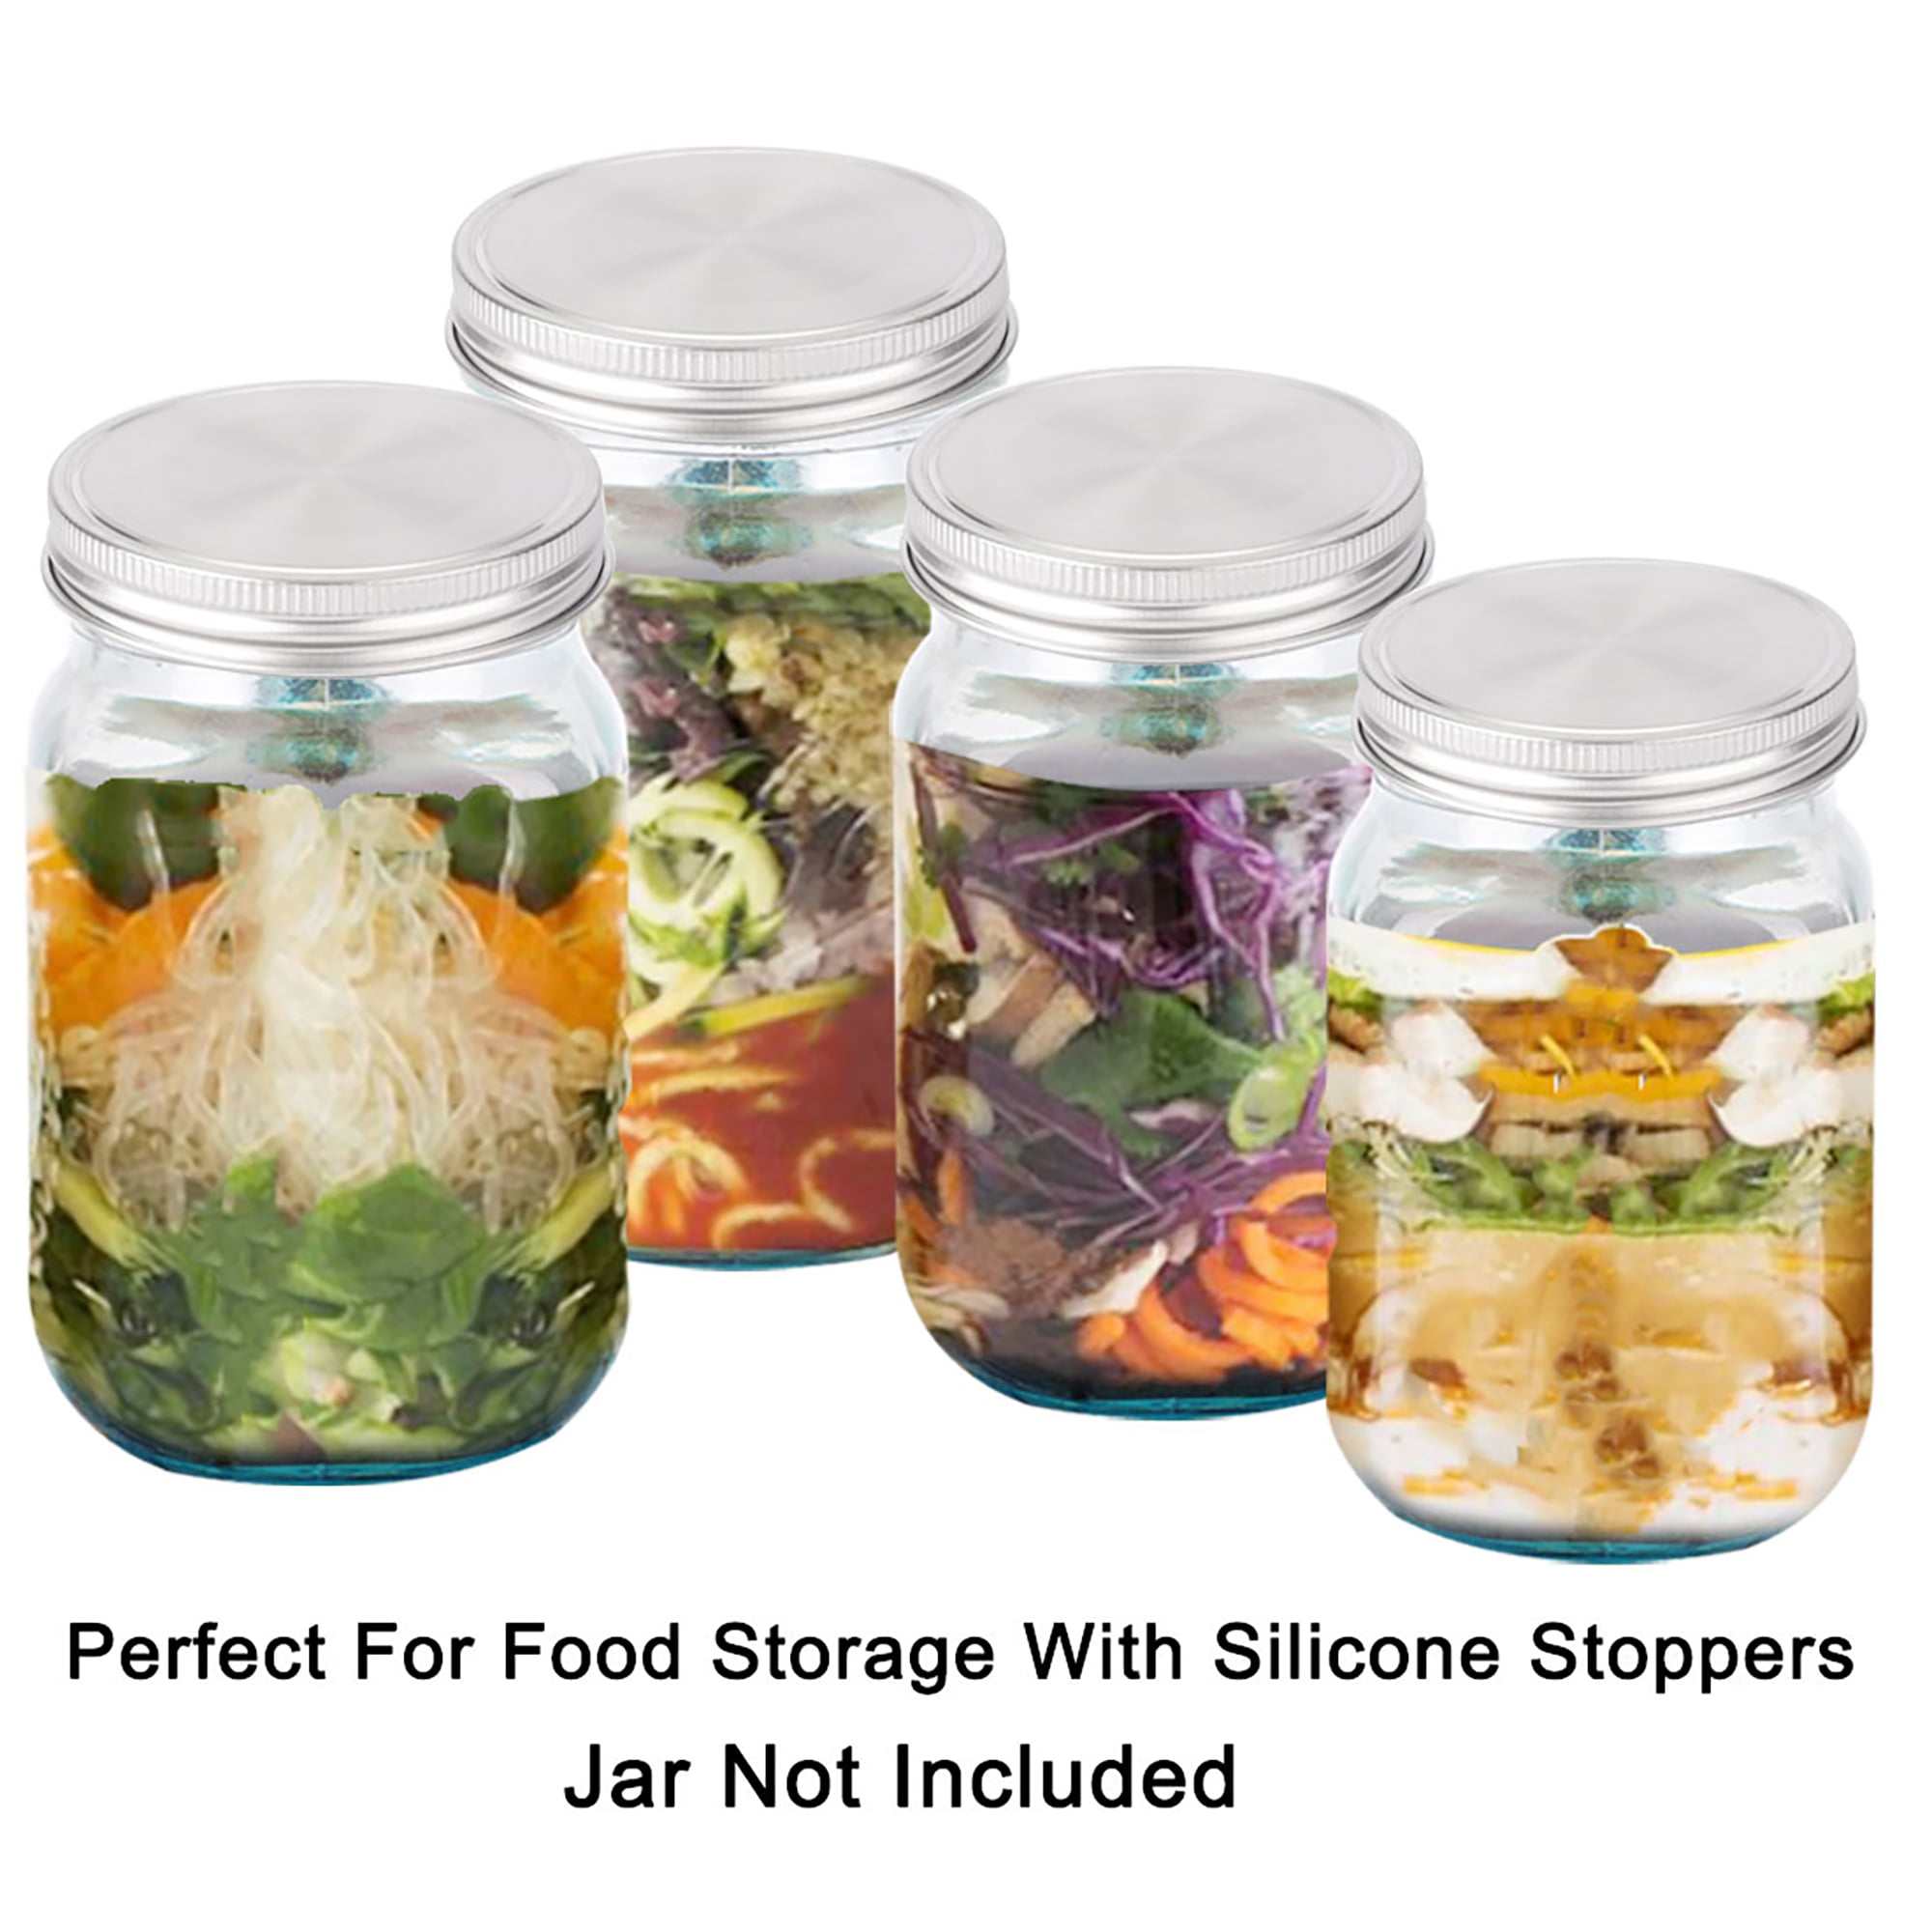 2 Pcs Stainless Steel Sprouting Jar Lids with 2 Pcs Stainless Steel Sprouting Stands for Regular/Wide Mouth Mason Jar